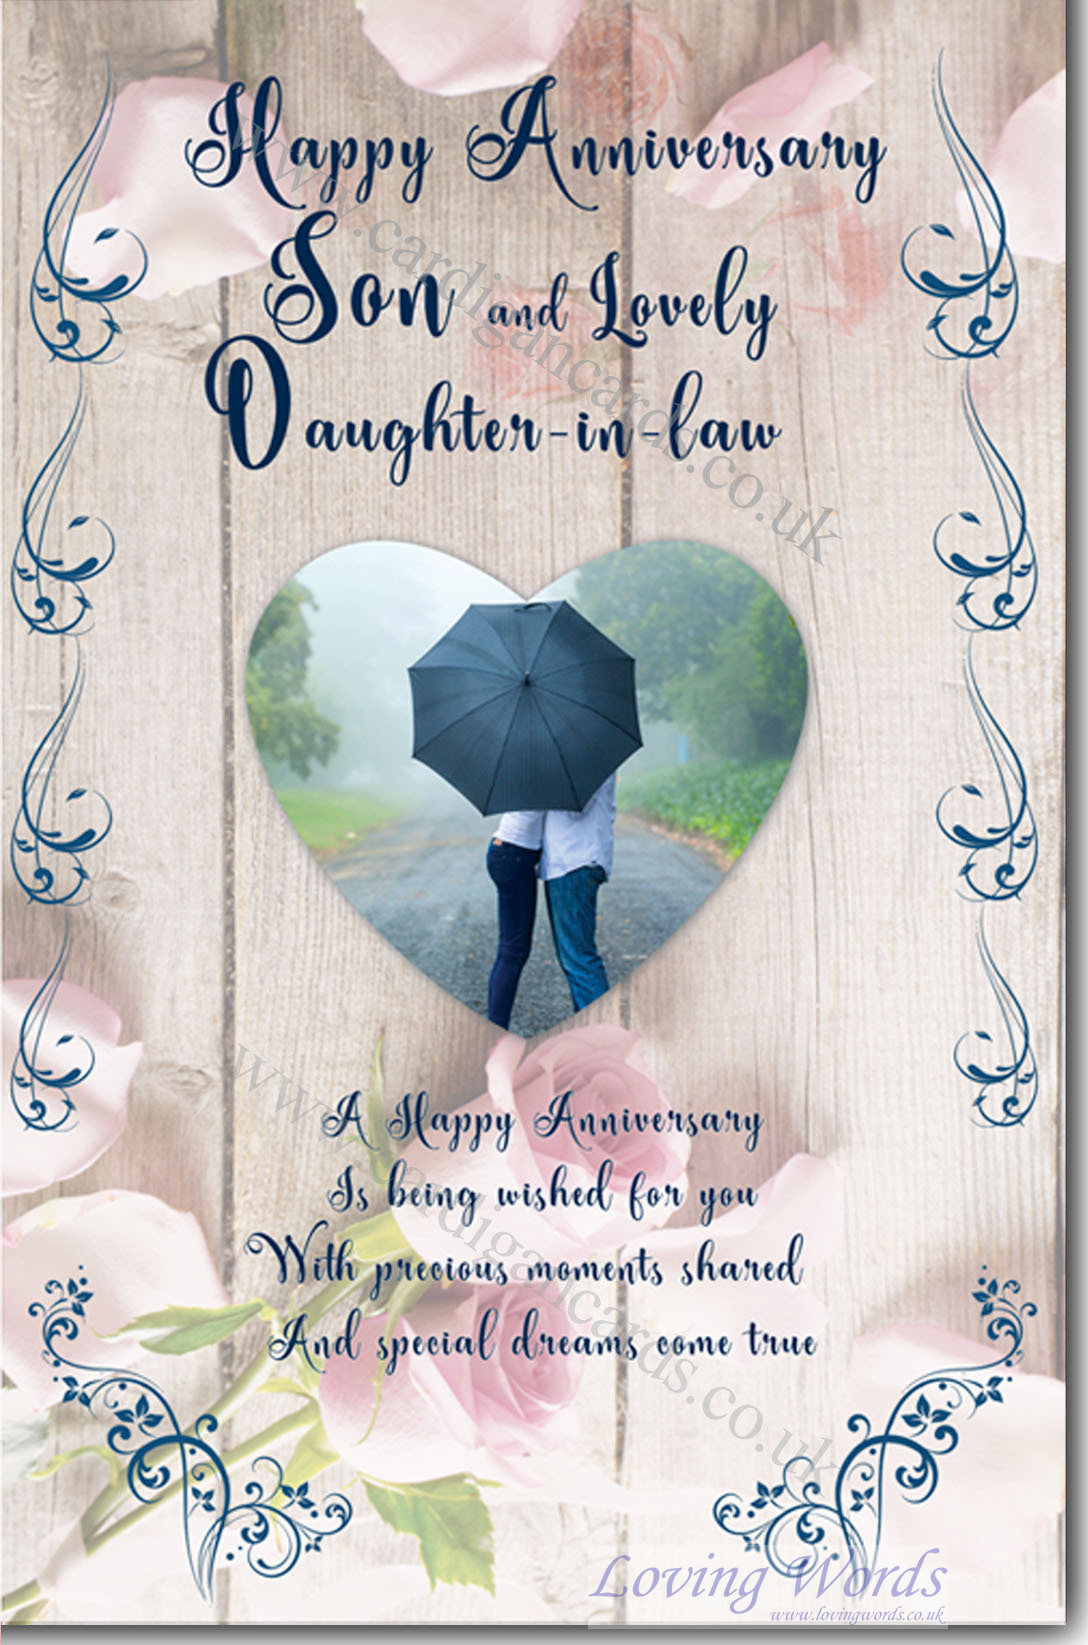 son-daughter-in-law-anniv-greeting-cards-by-loving-words